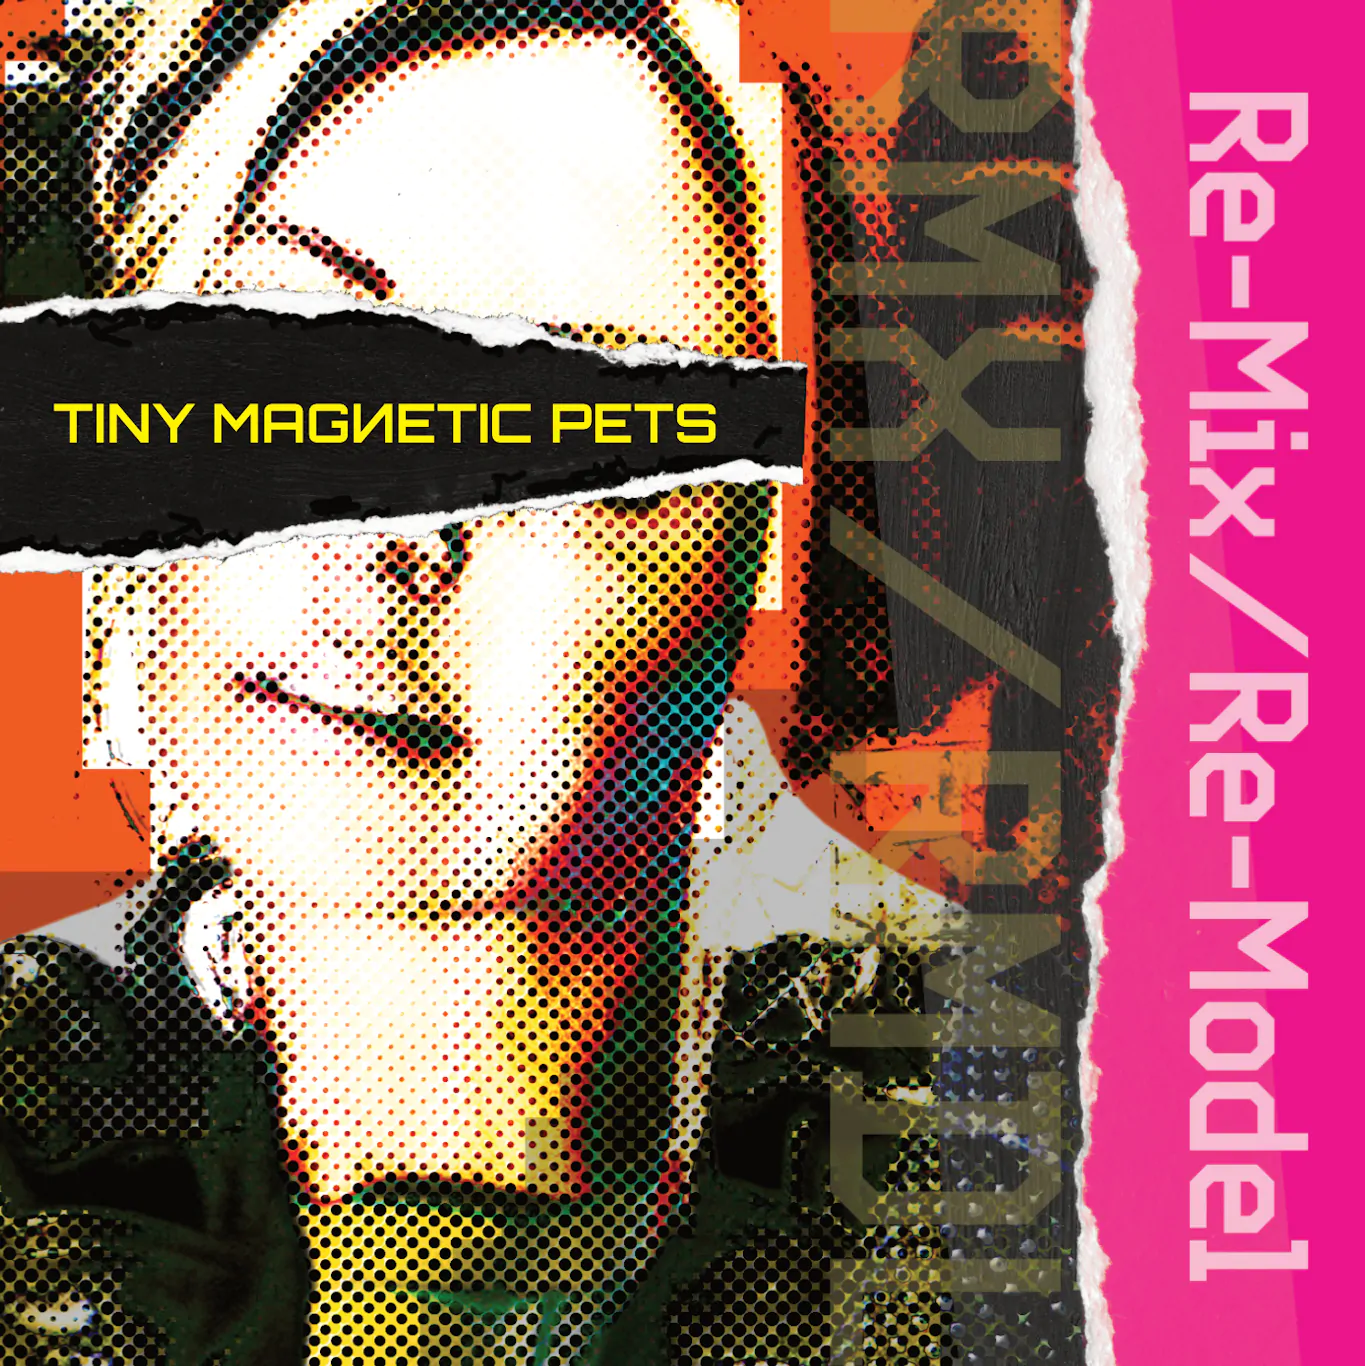 Irish synth artists TINY MAGNETIC PETS announce new album ‘Re-Mix/Re-Model’